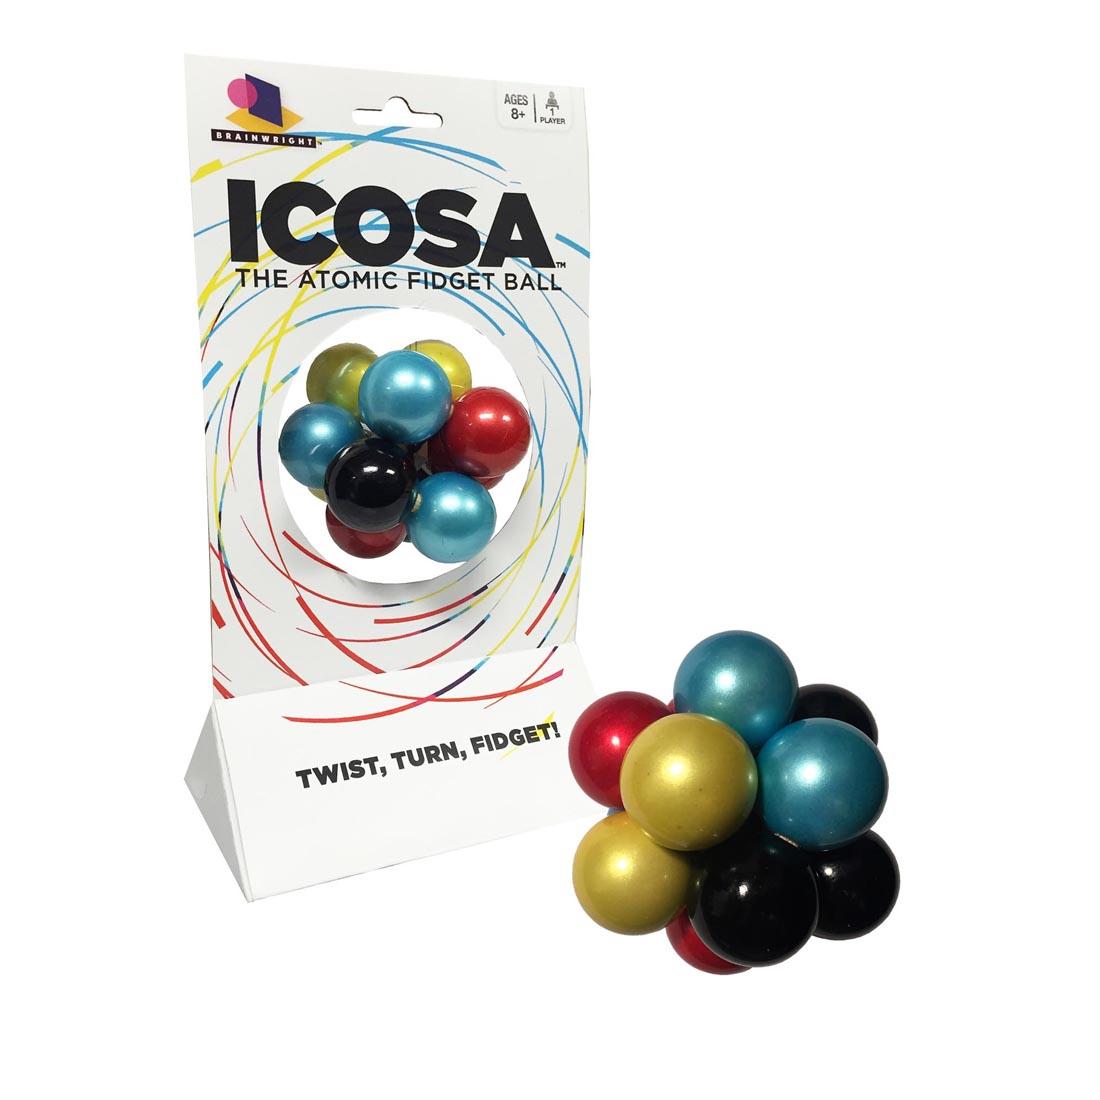 Icosa: The Atomic Fidget Ball shown both in and out of packaging